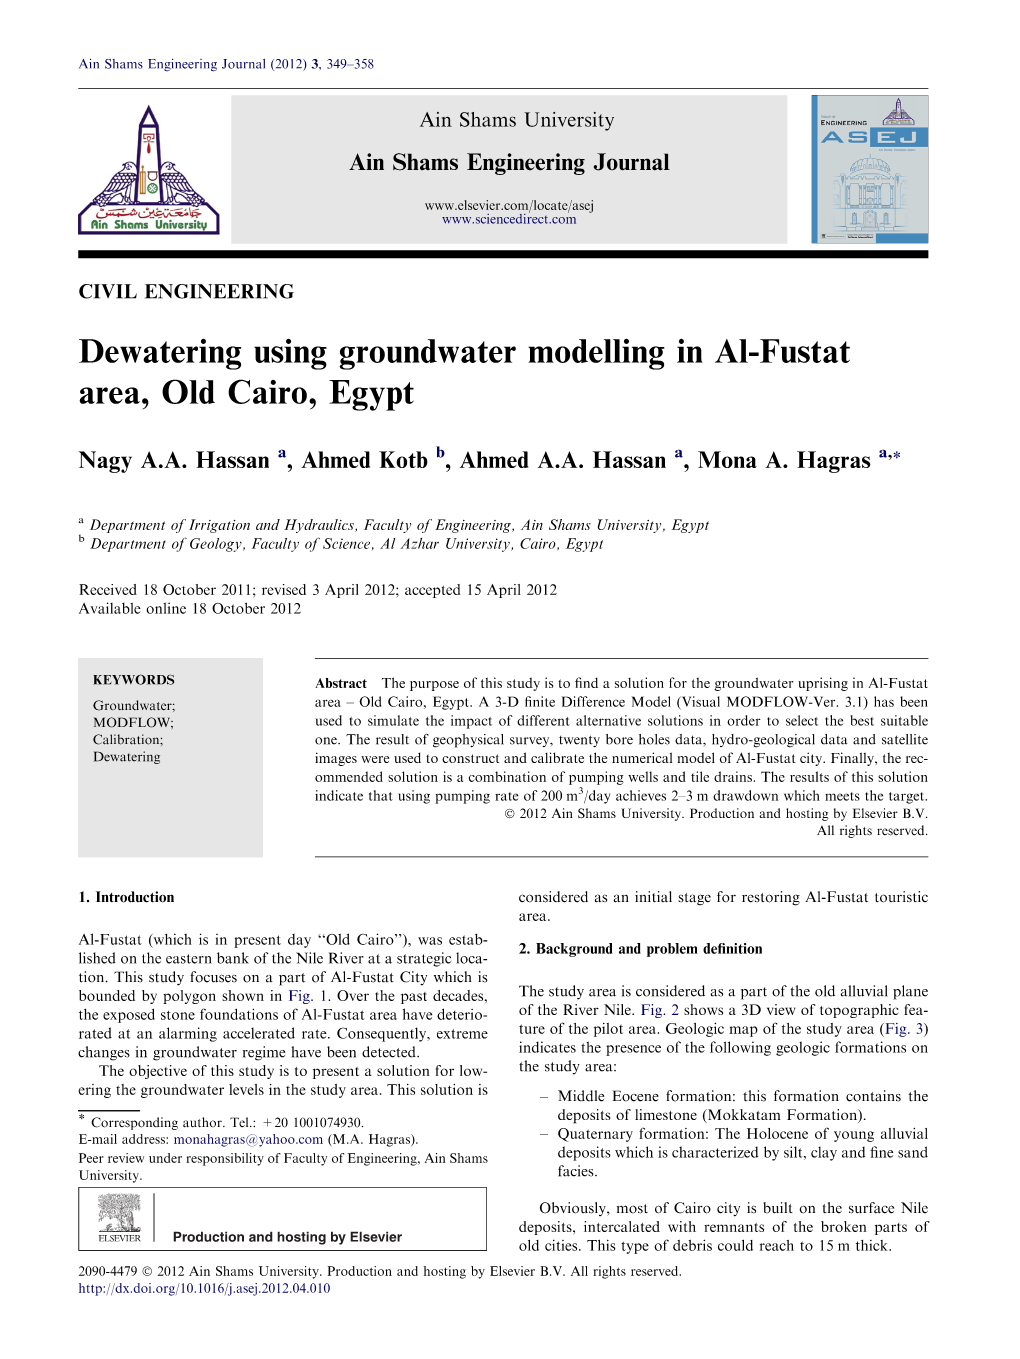 Dewatering Using Groundwater Modelling in Al-Fustat Area, Old Cairo, Egypt